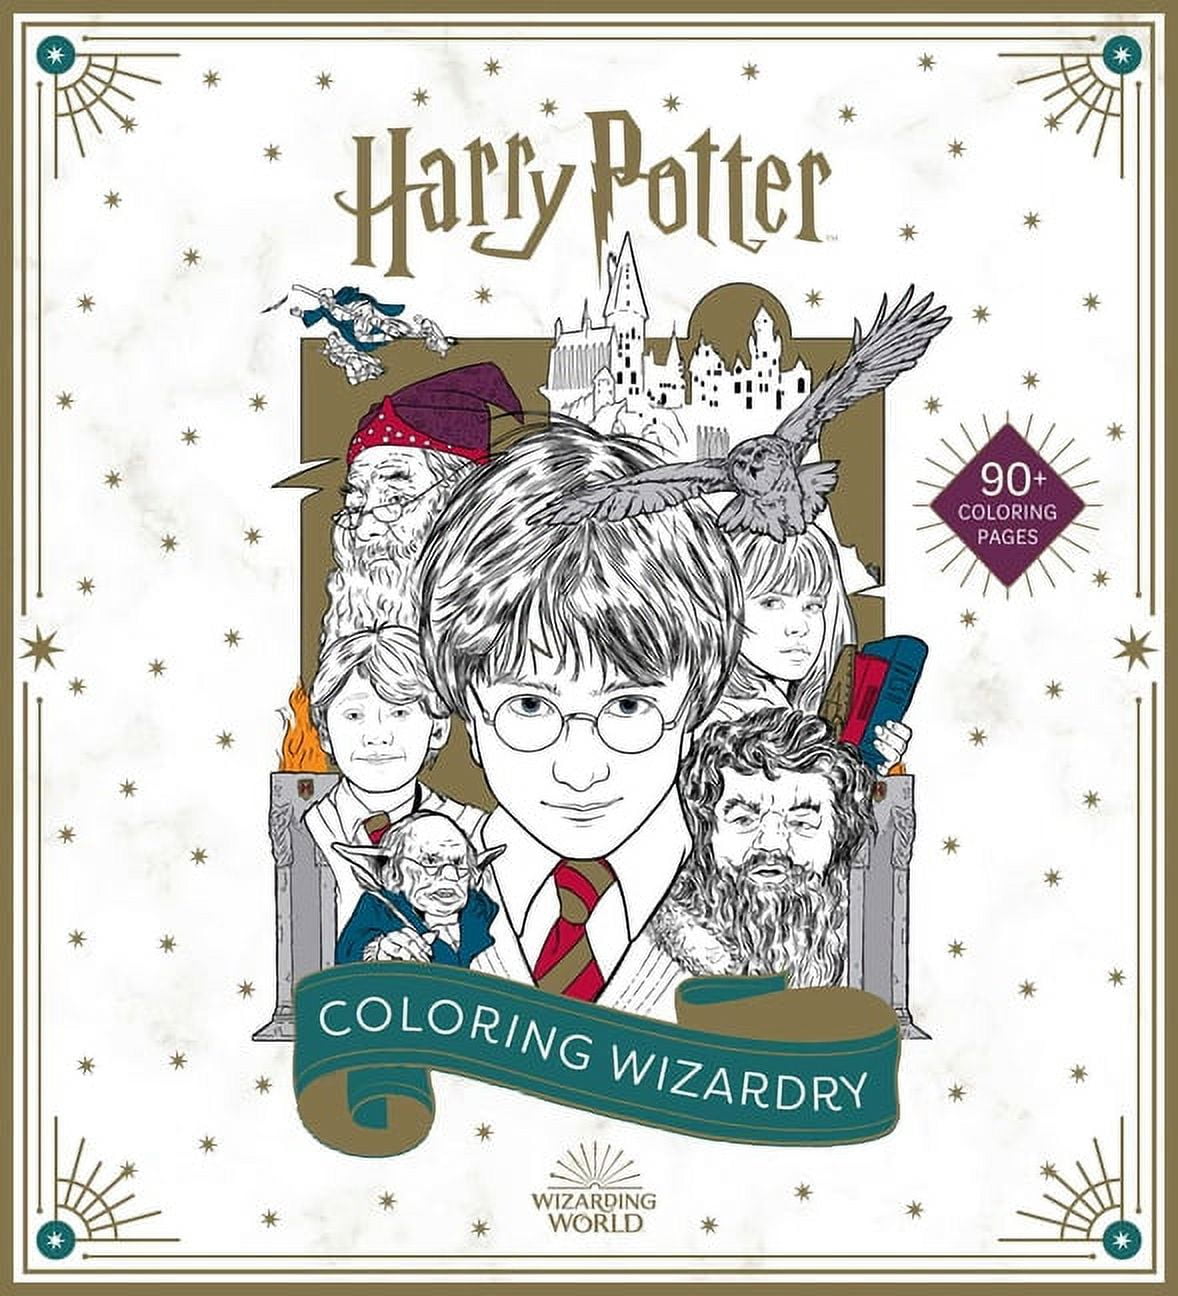 Harry Potter Coloring Book by Hendrick, Harry Book The Fast Free Shipping